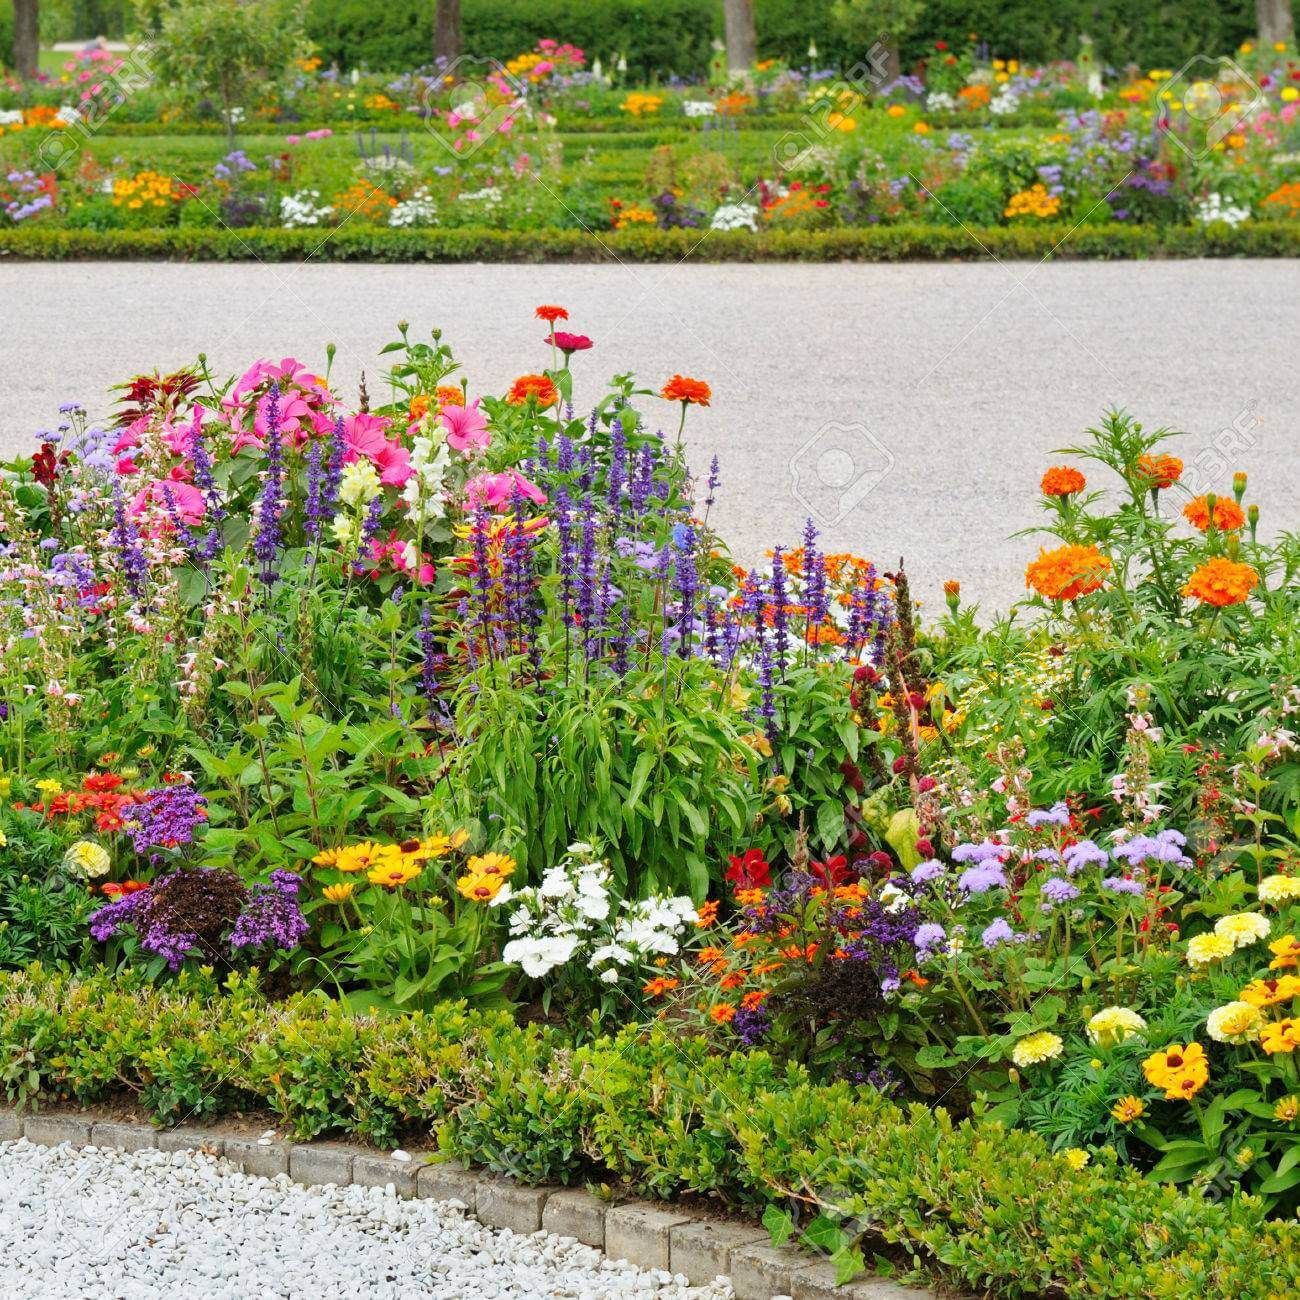 Bringing Nature Alive: Creative Flower Garden Ideas for Compact Spaces